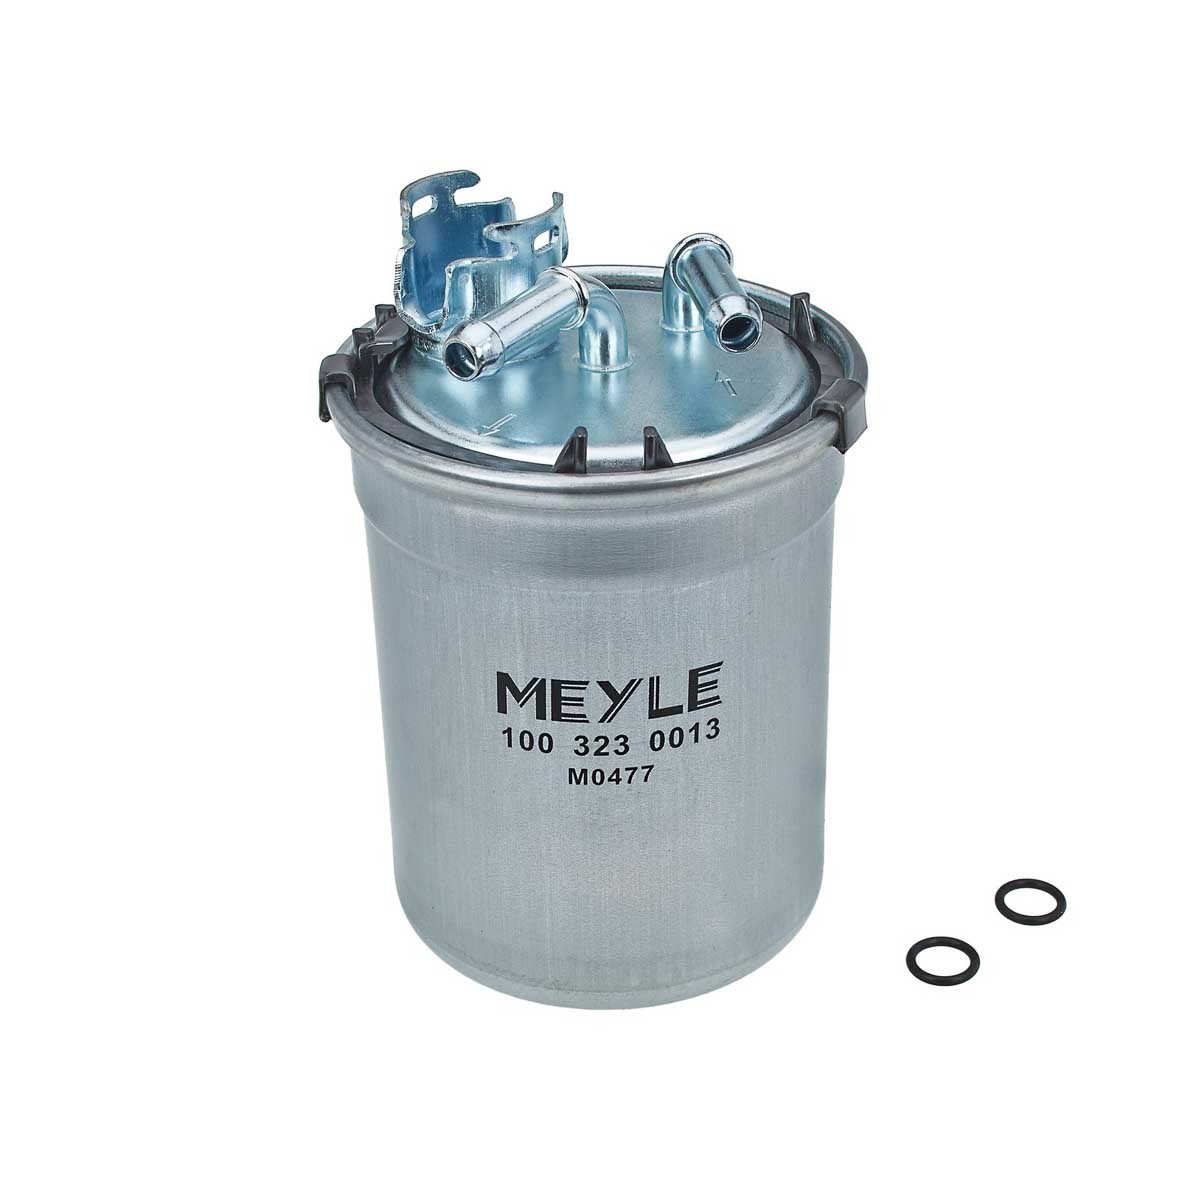 MEYLE 100 323 0013 Fuel filter In-Line Filter, ORIGINAL Quality, with gaskets/seals